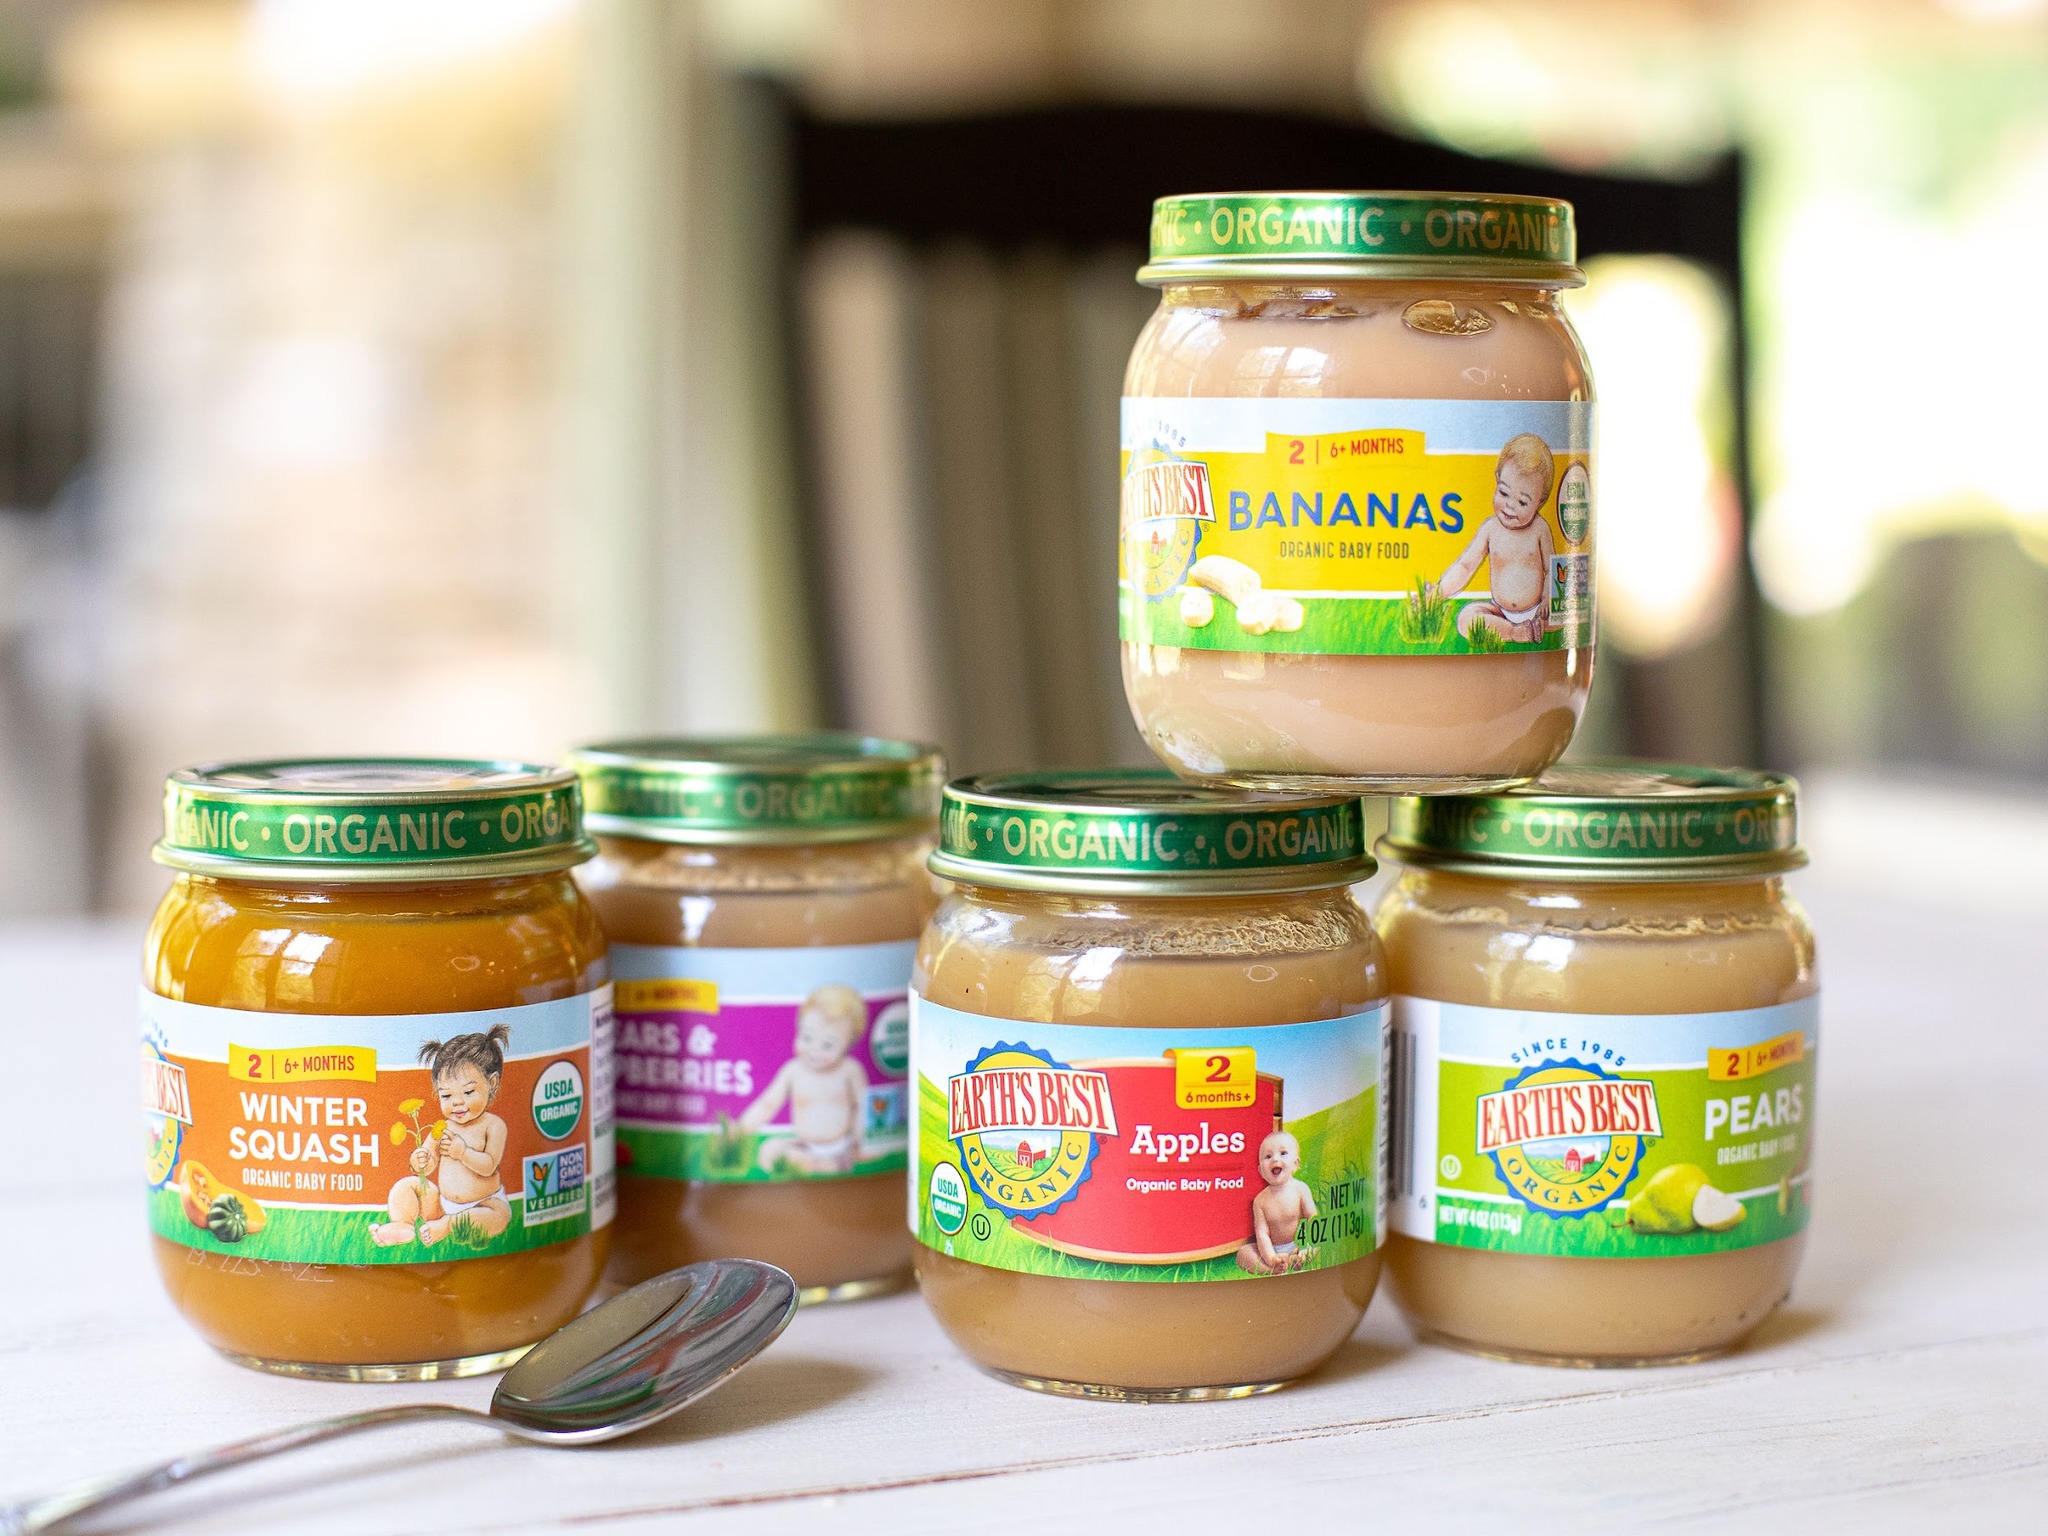 Earth’s Best Organic Baby Food As Low As 47¢ Per Jar At Publix